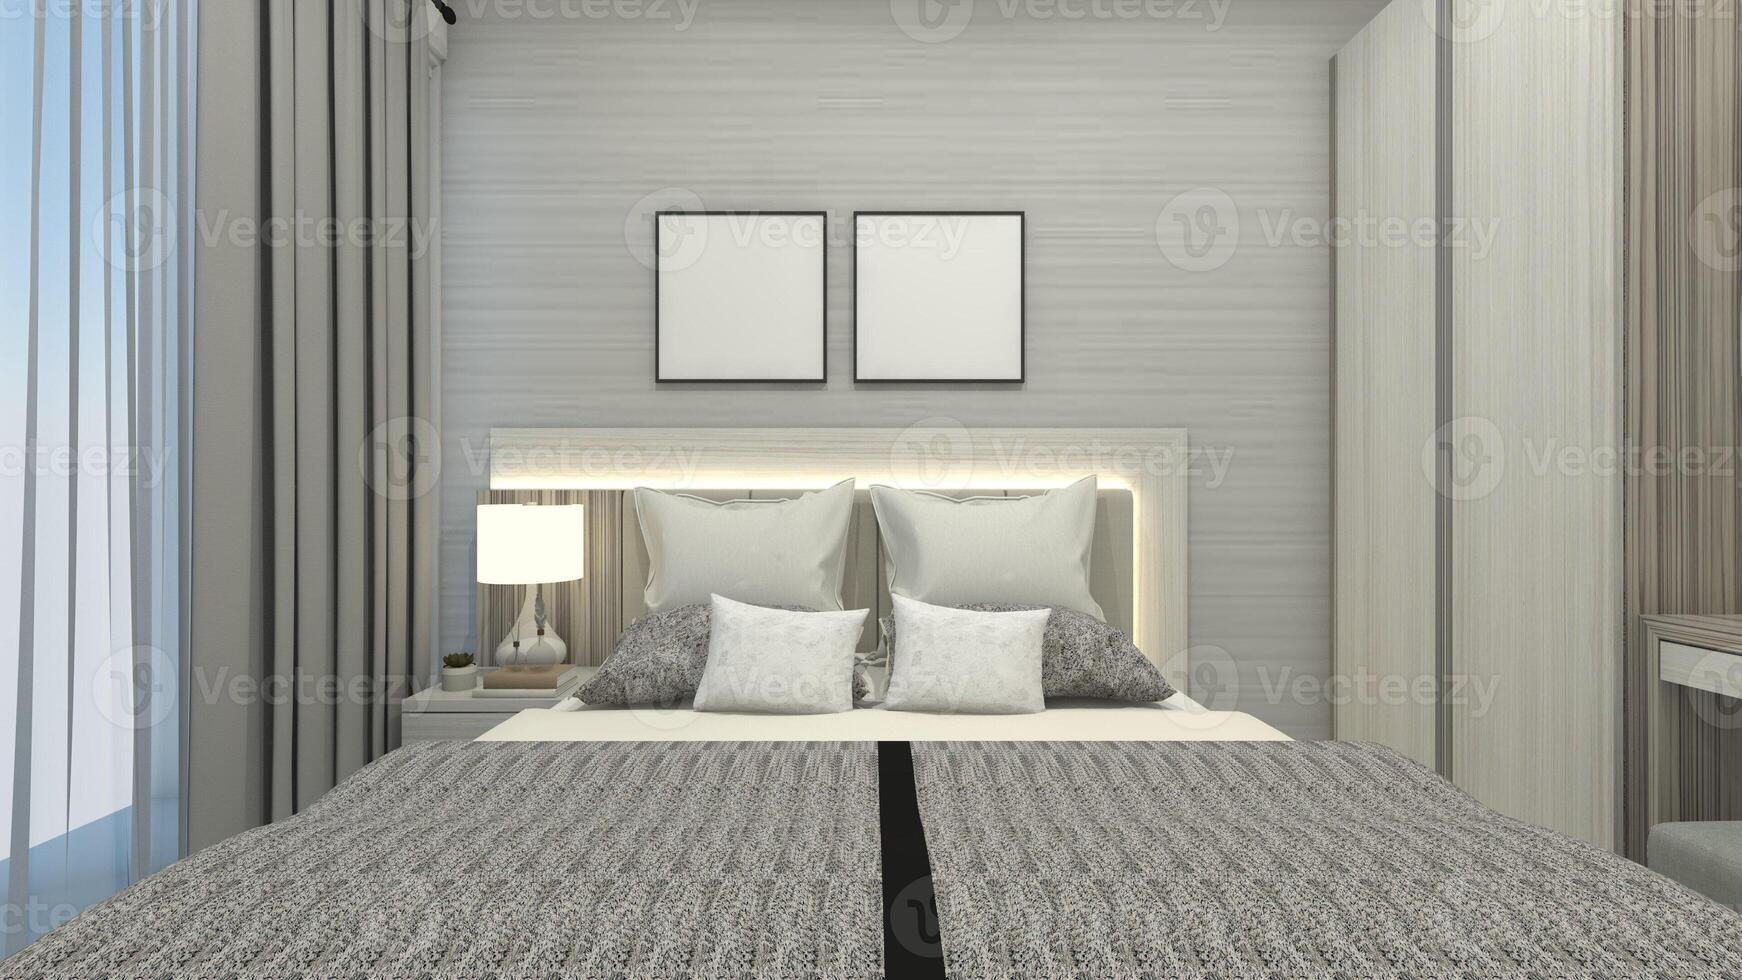 Minimalist Bedroom Design with Simple Wooden Headboard and Lighting Decoration, 3D Illustration photo